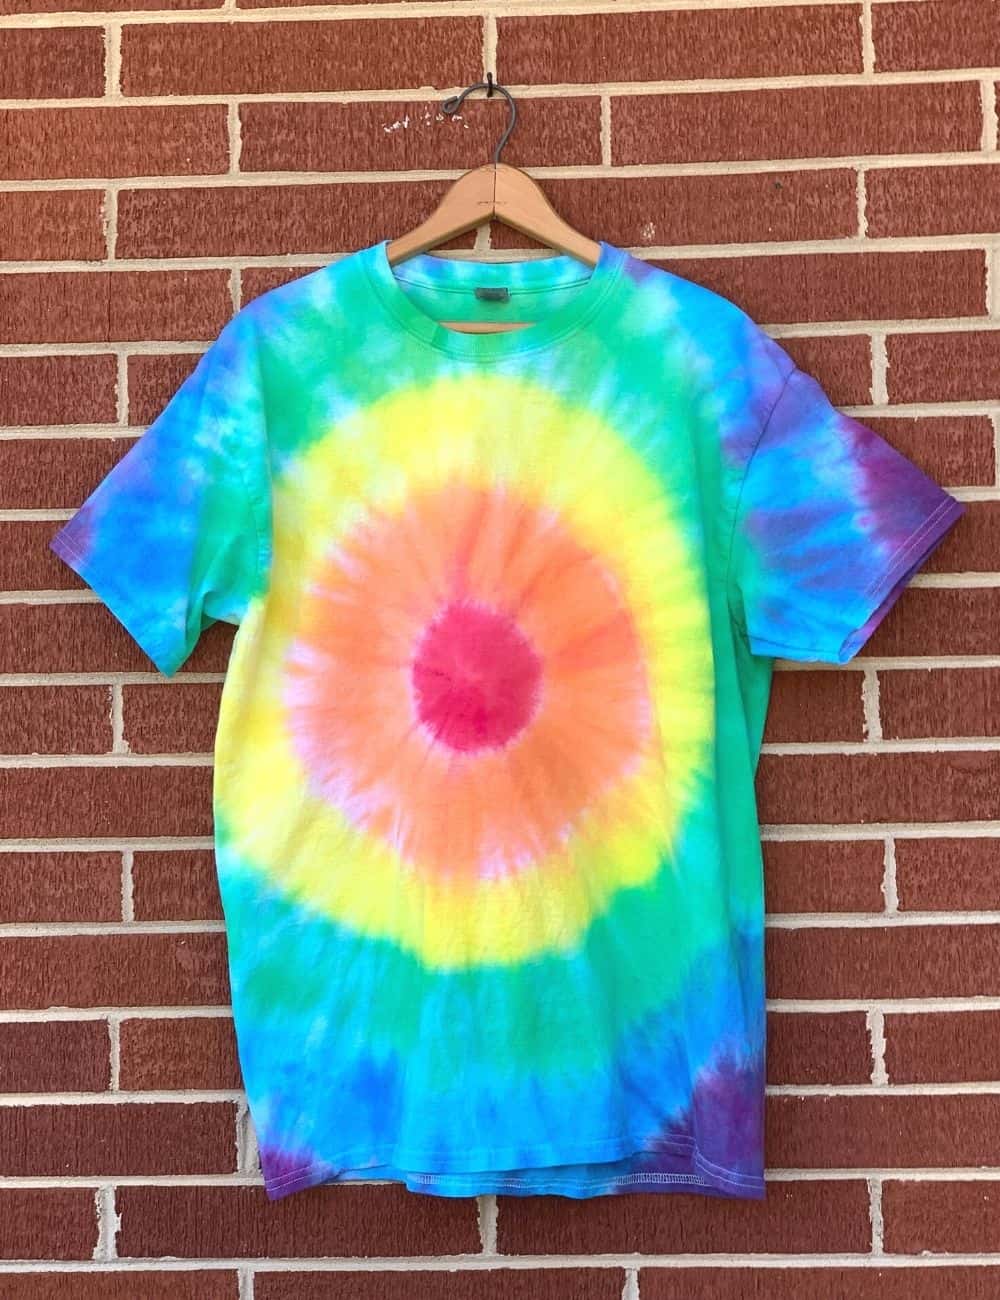 Tie Dye Bullseye: How To Make The Classic Tie Dye Pattern - Chaotically ...